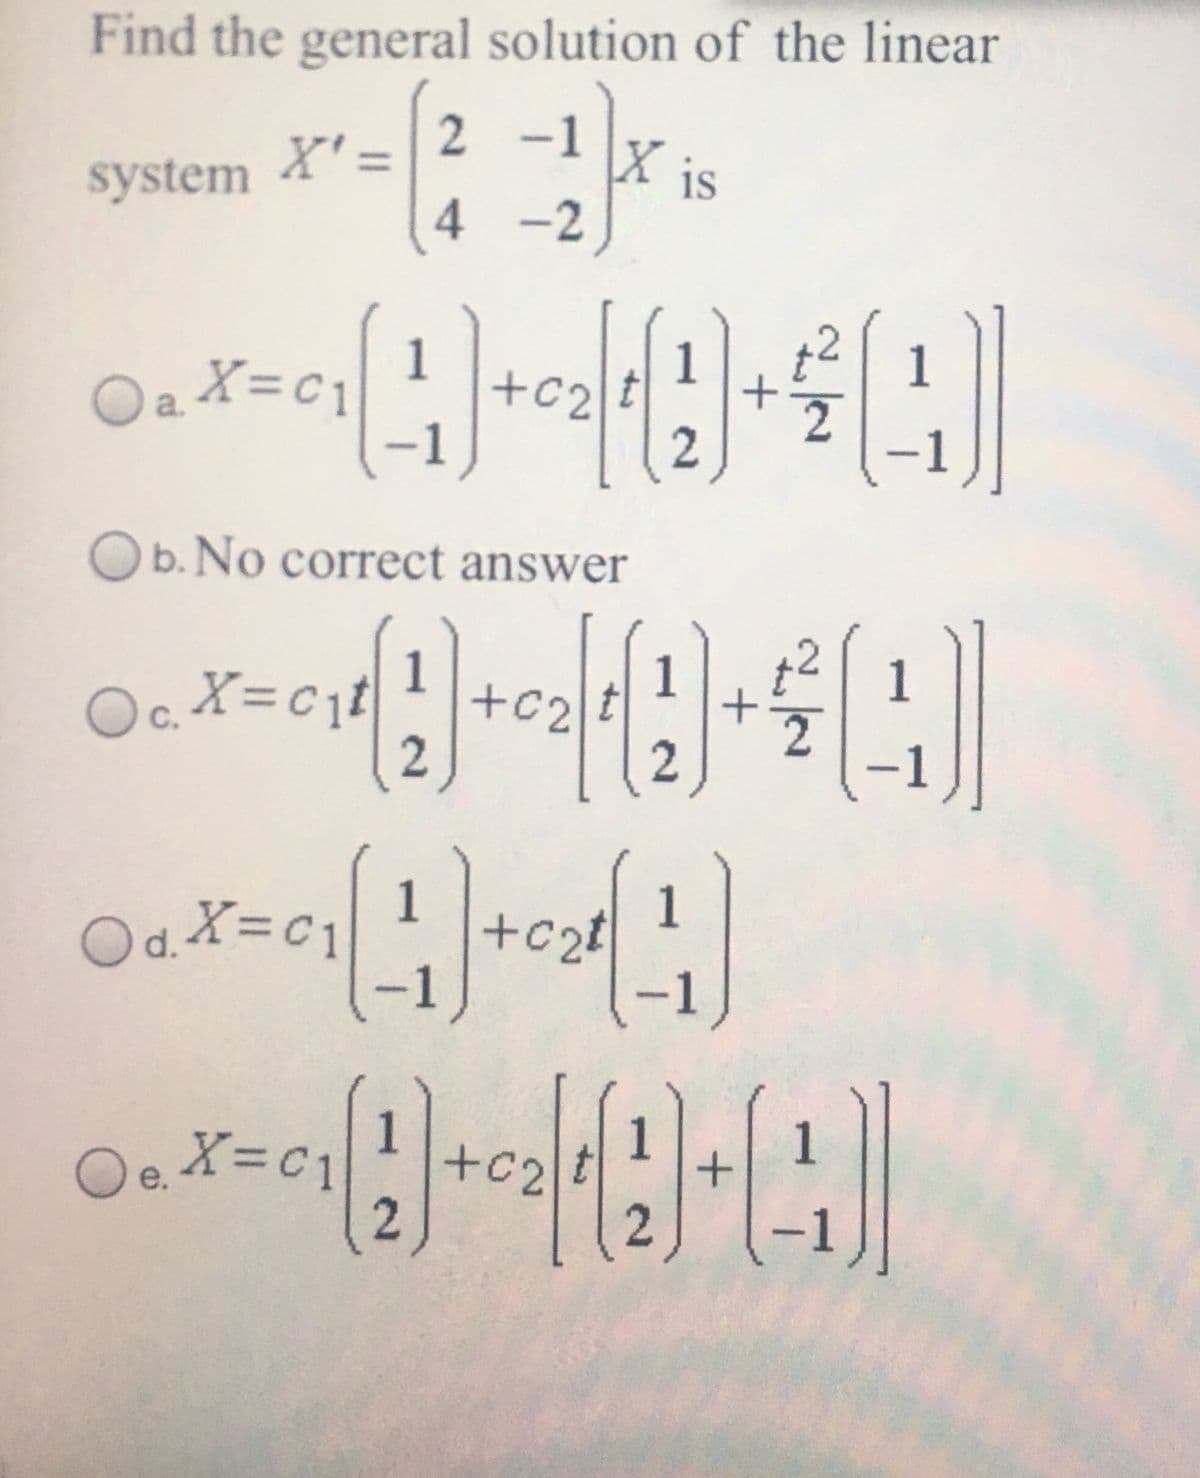 Find the general solution of the linear
X' =
system
2 -1
X is
4 -2
Oa X=c1
1
+c2
1
-1
Ob. No correct answer
1
1
Oc.
c. X=cji
1
1
Od.X=C1
c2t
-
O.X=c1
1
+c2
1
